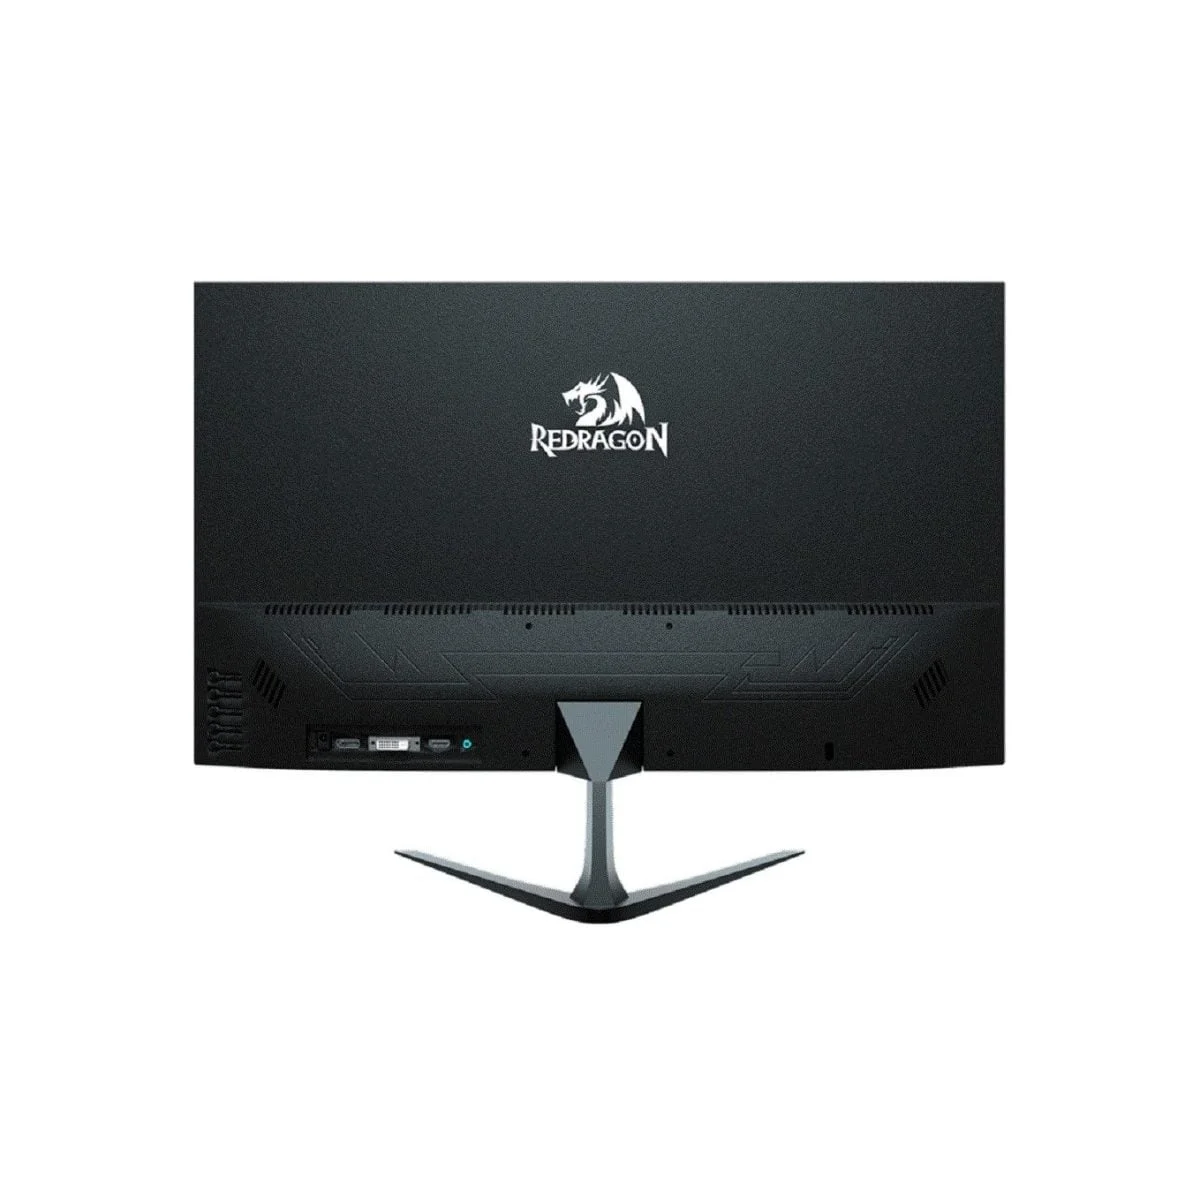 954B35Af372A2B16B94C142A1F74026D Hi Redragon &Lt;H1&Gt;Redragon Emerald 27” Gaming Monitor - Gm270F165&Lt;/H1&Gt; &Lt;Span Style=&Quot;Font-Size: 16Px;&Quot;&Gt;A Standard Monitor Is Just The Visual Output Of The Computing Process. A Gaming Monitor, On The Other Hand, Is An Instrument That Must Be Capable Of Representing An Almost Infinite Beam Of Light, Color And Movement Graduations. To Serve Recreational And Competitive Play; To Exploit All The Graphic Power Of The Best Teams; To Show More, Faster And Better. That, At Least, Is The Mission That The Emerald Has Come To Fulfill.&Lt;/Span&Gt; Gaming Monitor Redragon Emerald 27” Gaming Monitor